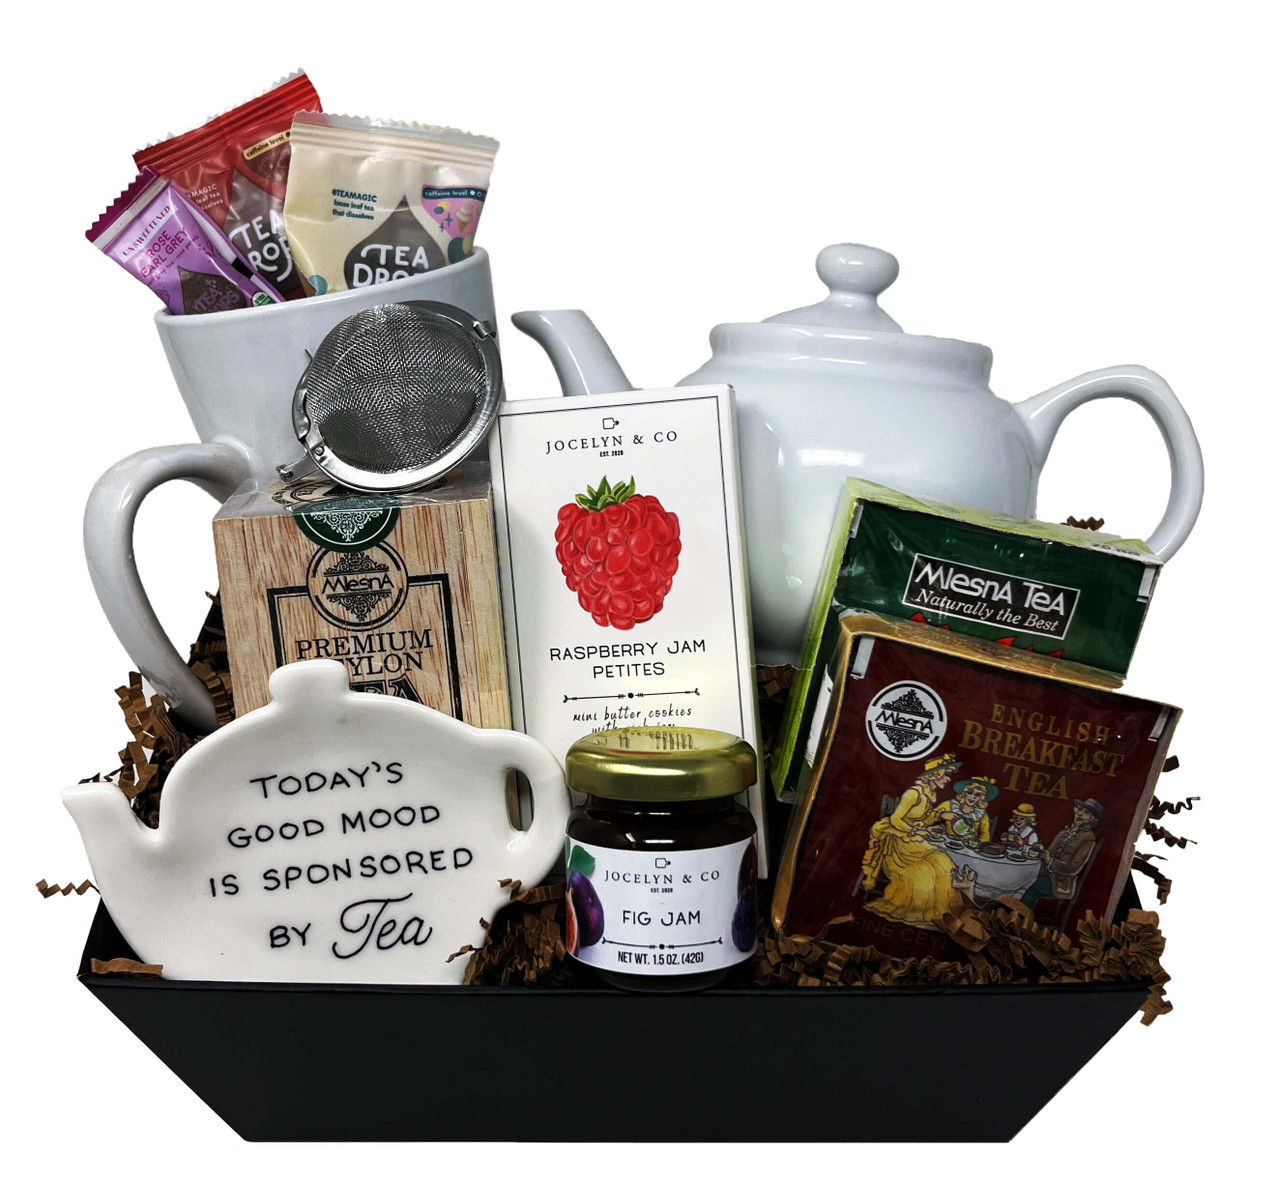 Gourmet Kitchen Items & Miscellaneous Gifts